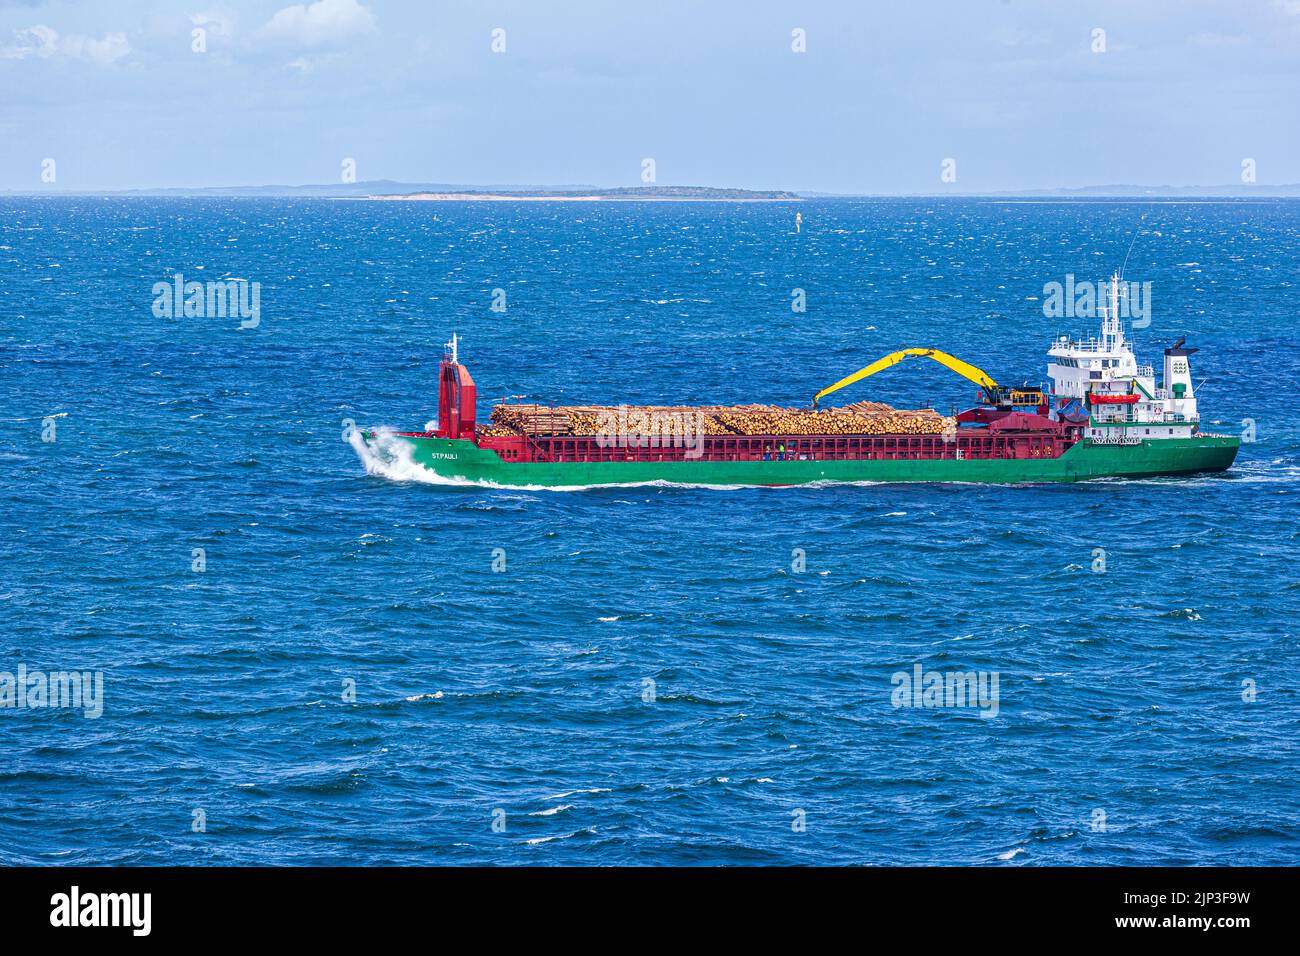 The general cargo ship St Pauli with a load of timber logs sailing in choppy seas in the Kattegat off the coast of Denmark Stock Photo